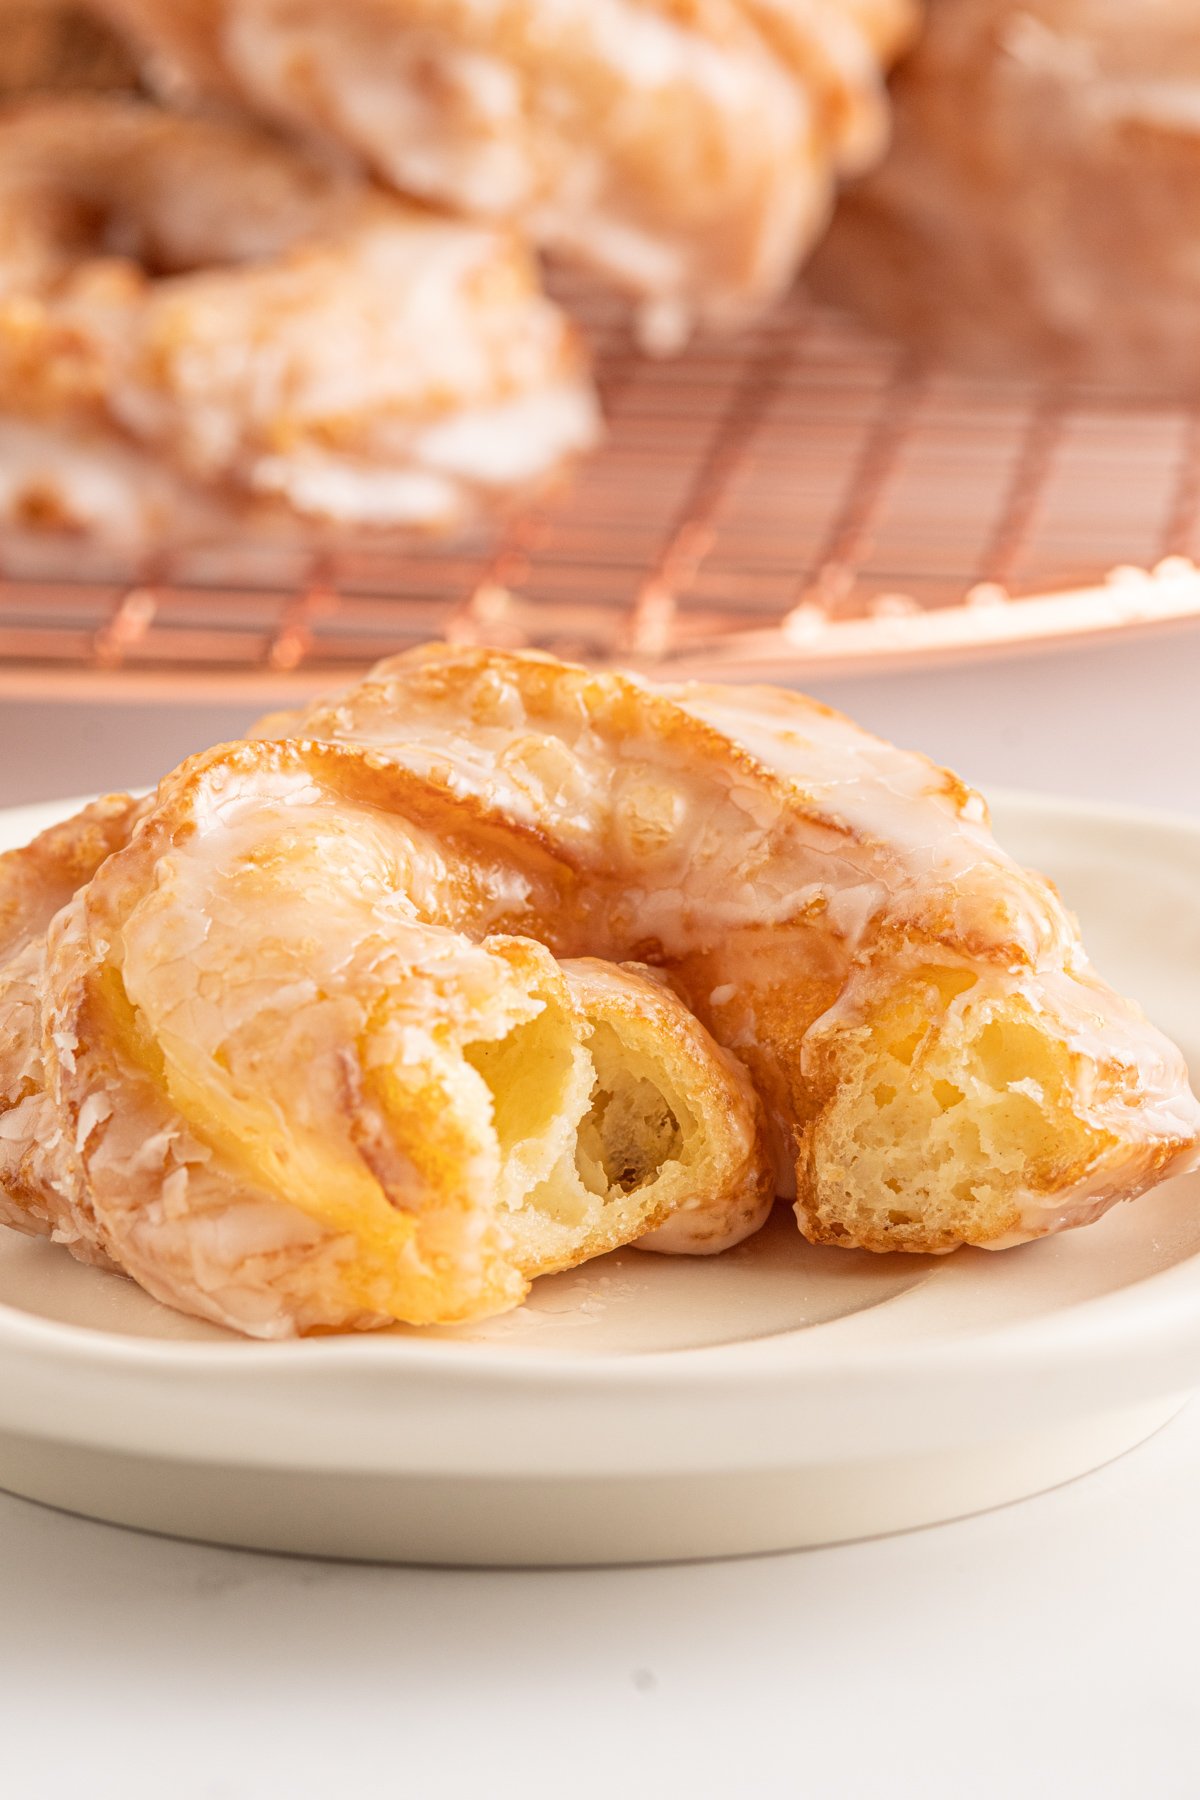 close up on a French crullers on a plate